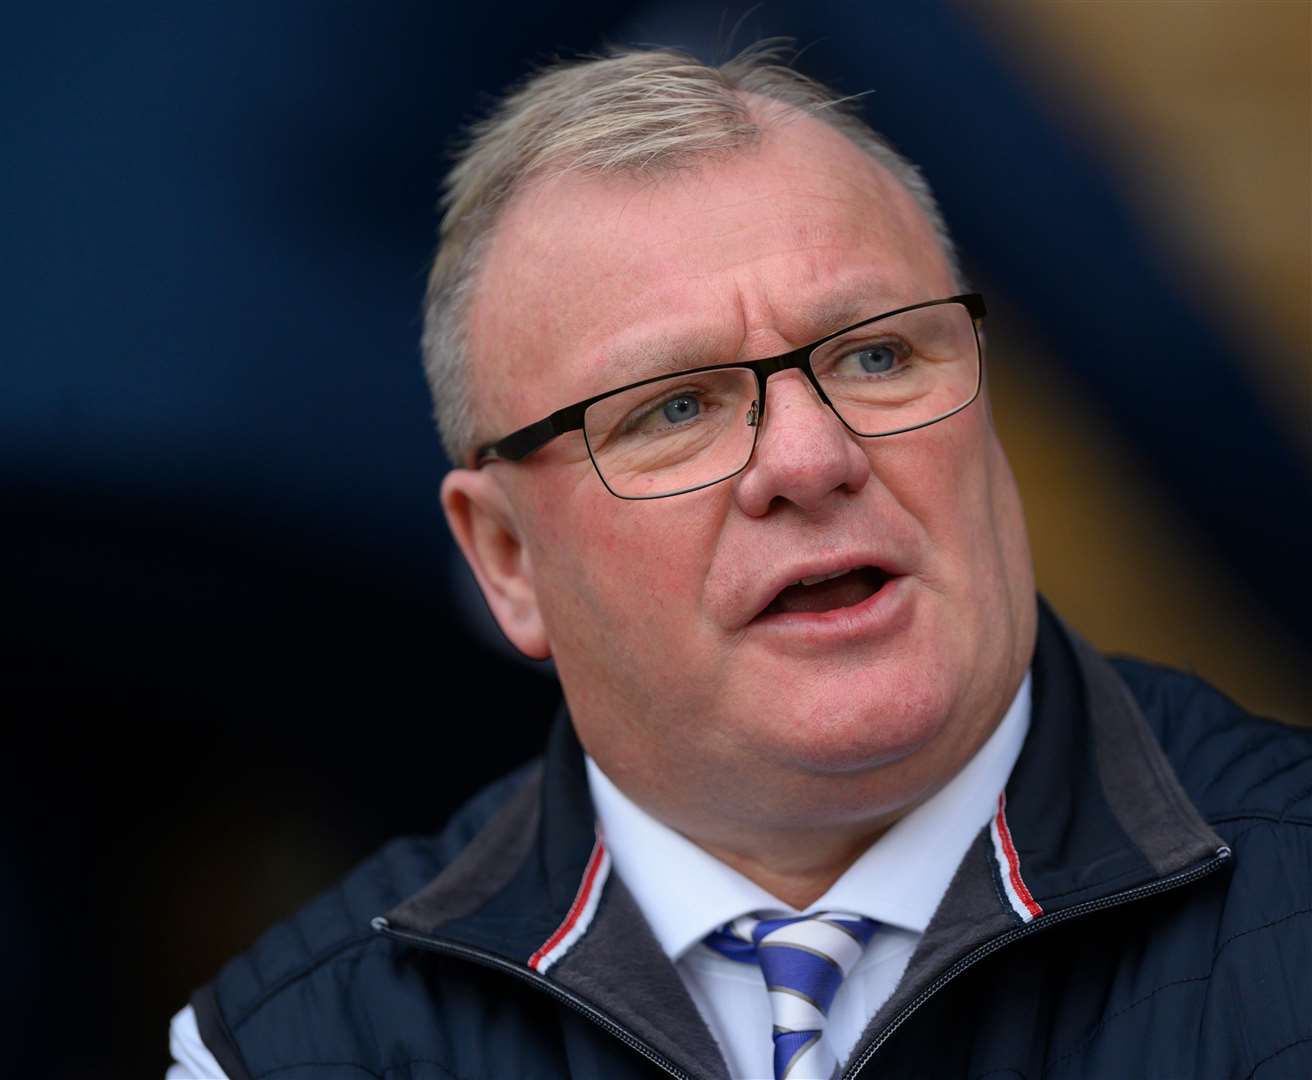 Gillingham would have won by more at Lincoln had they taken their chances says boss Steve Evans